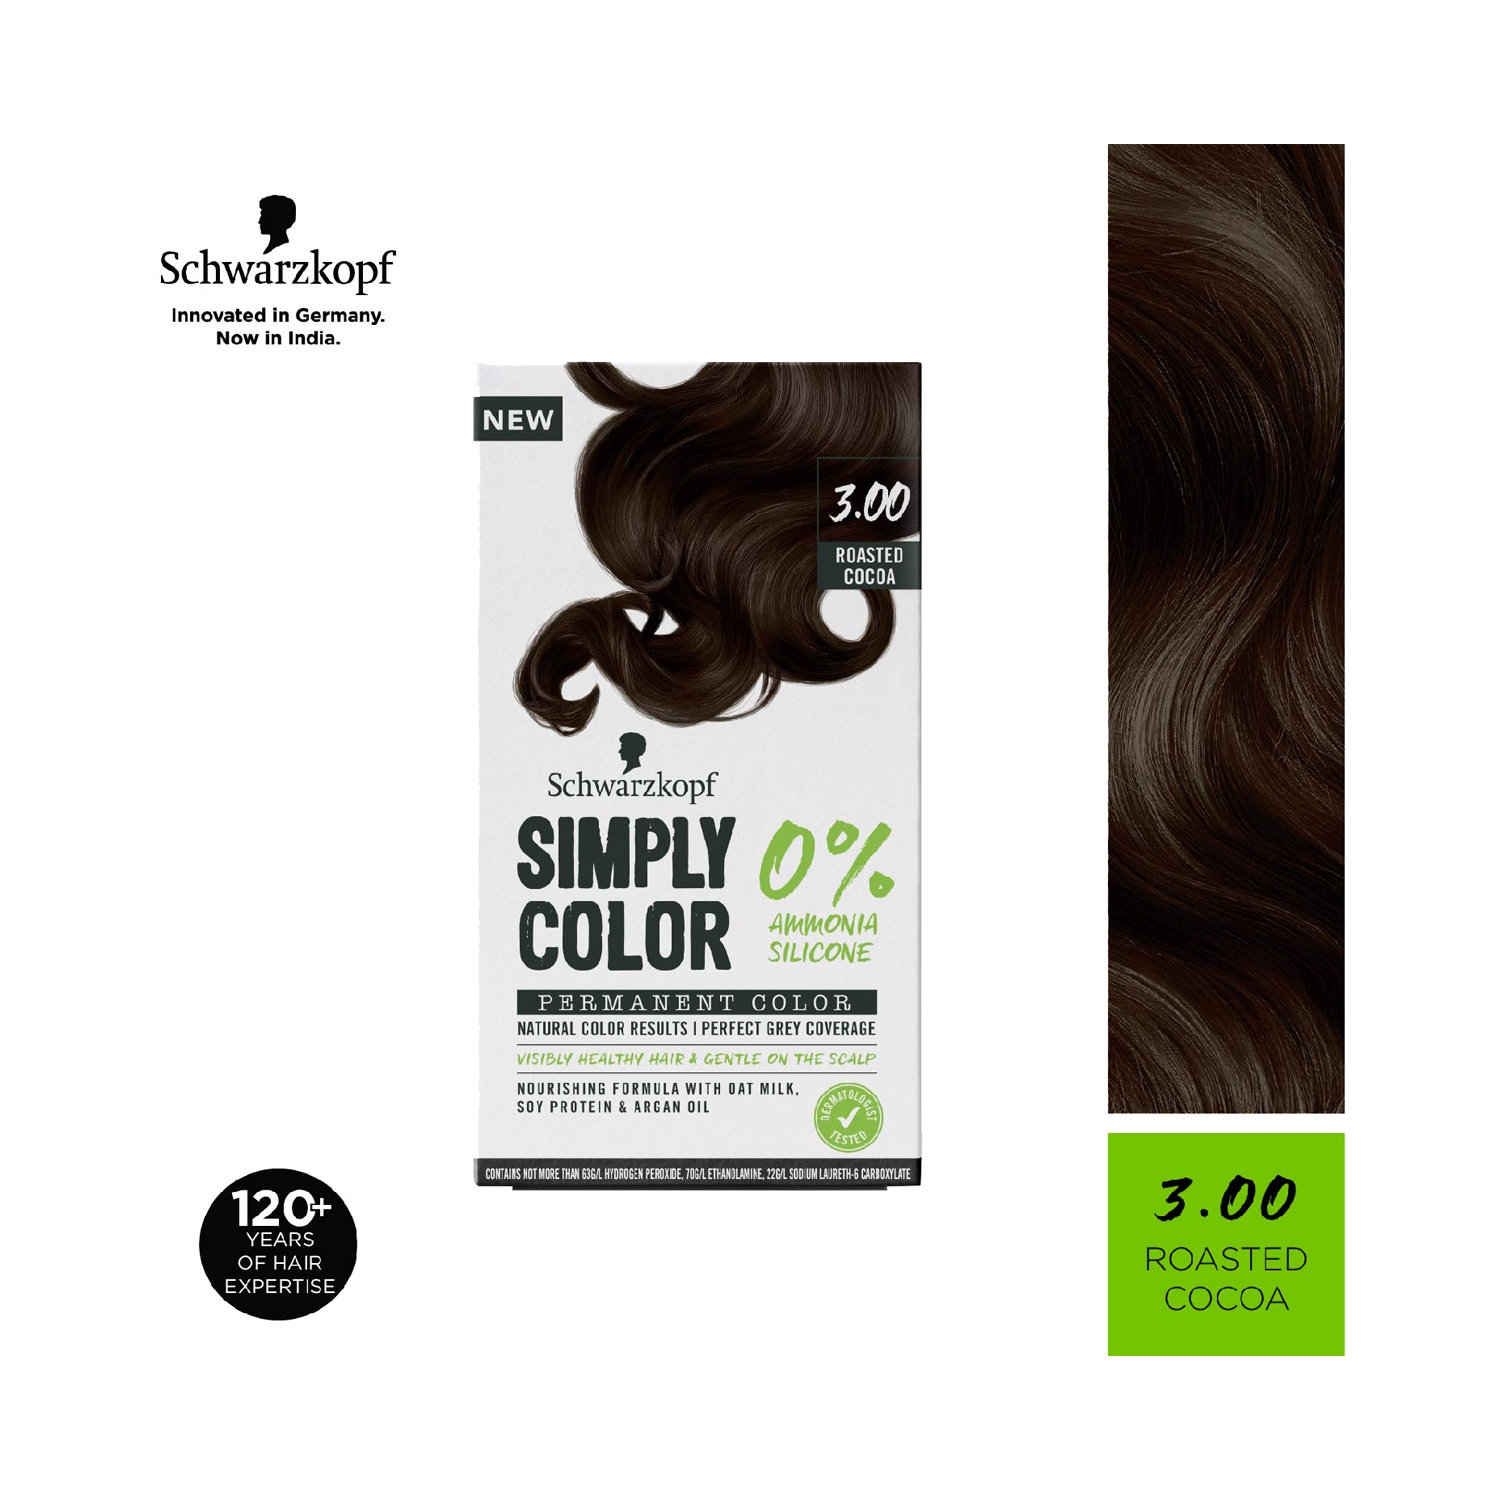 Schwarzkopf | Schwarzkopf Simply Color Permanent Hair Colour - 3.00 Roasted Cocoa (142.5ml)